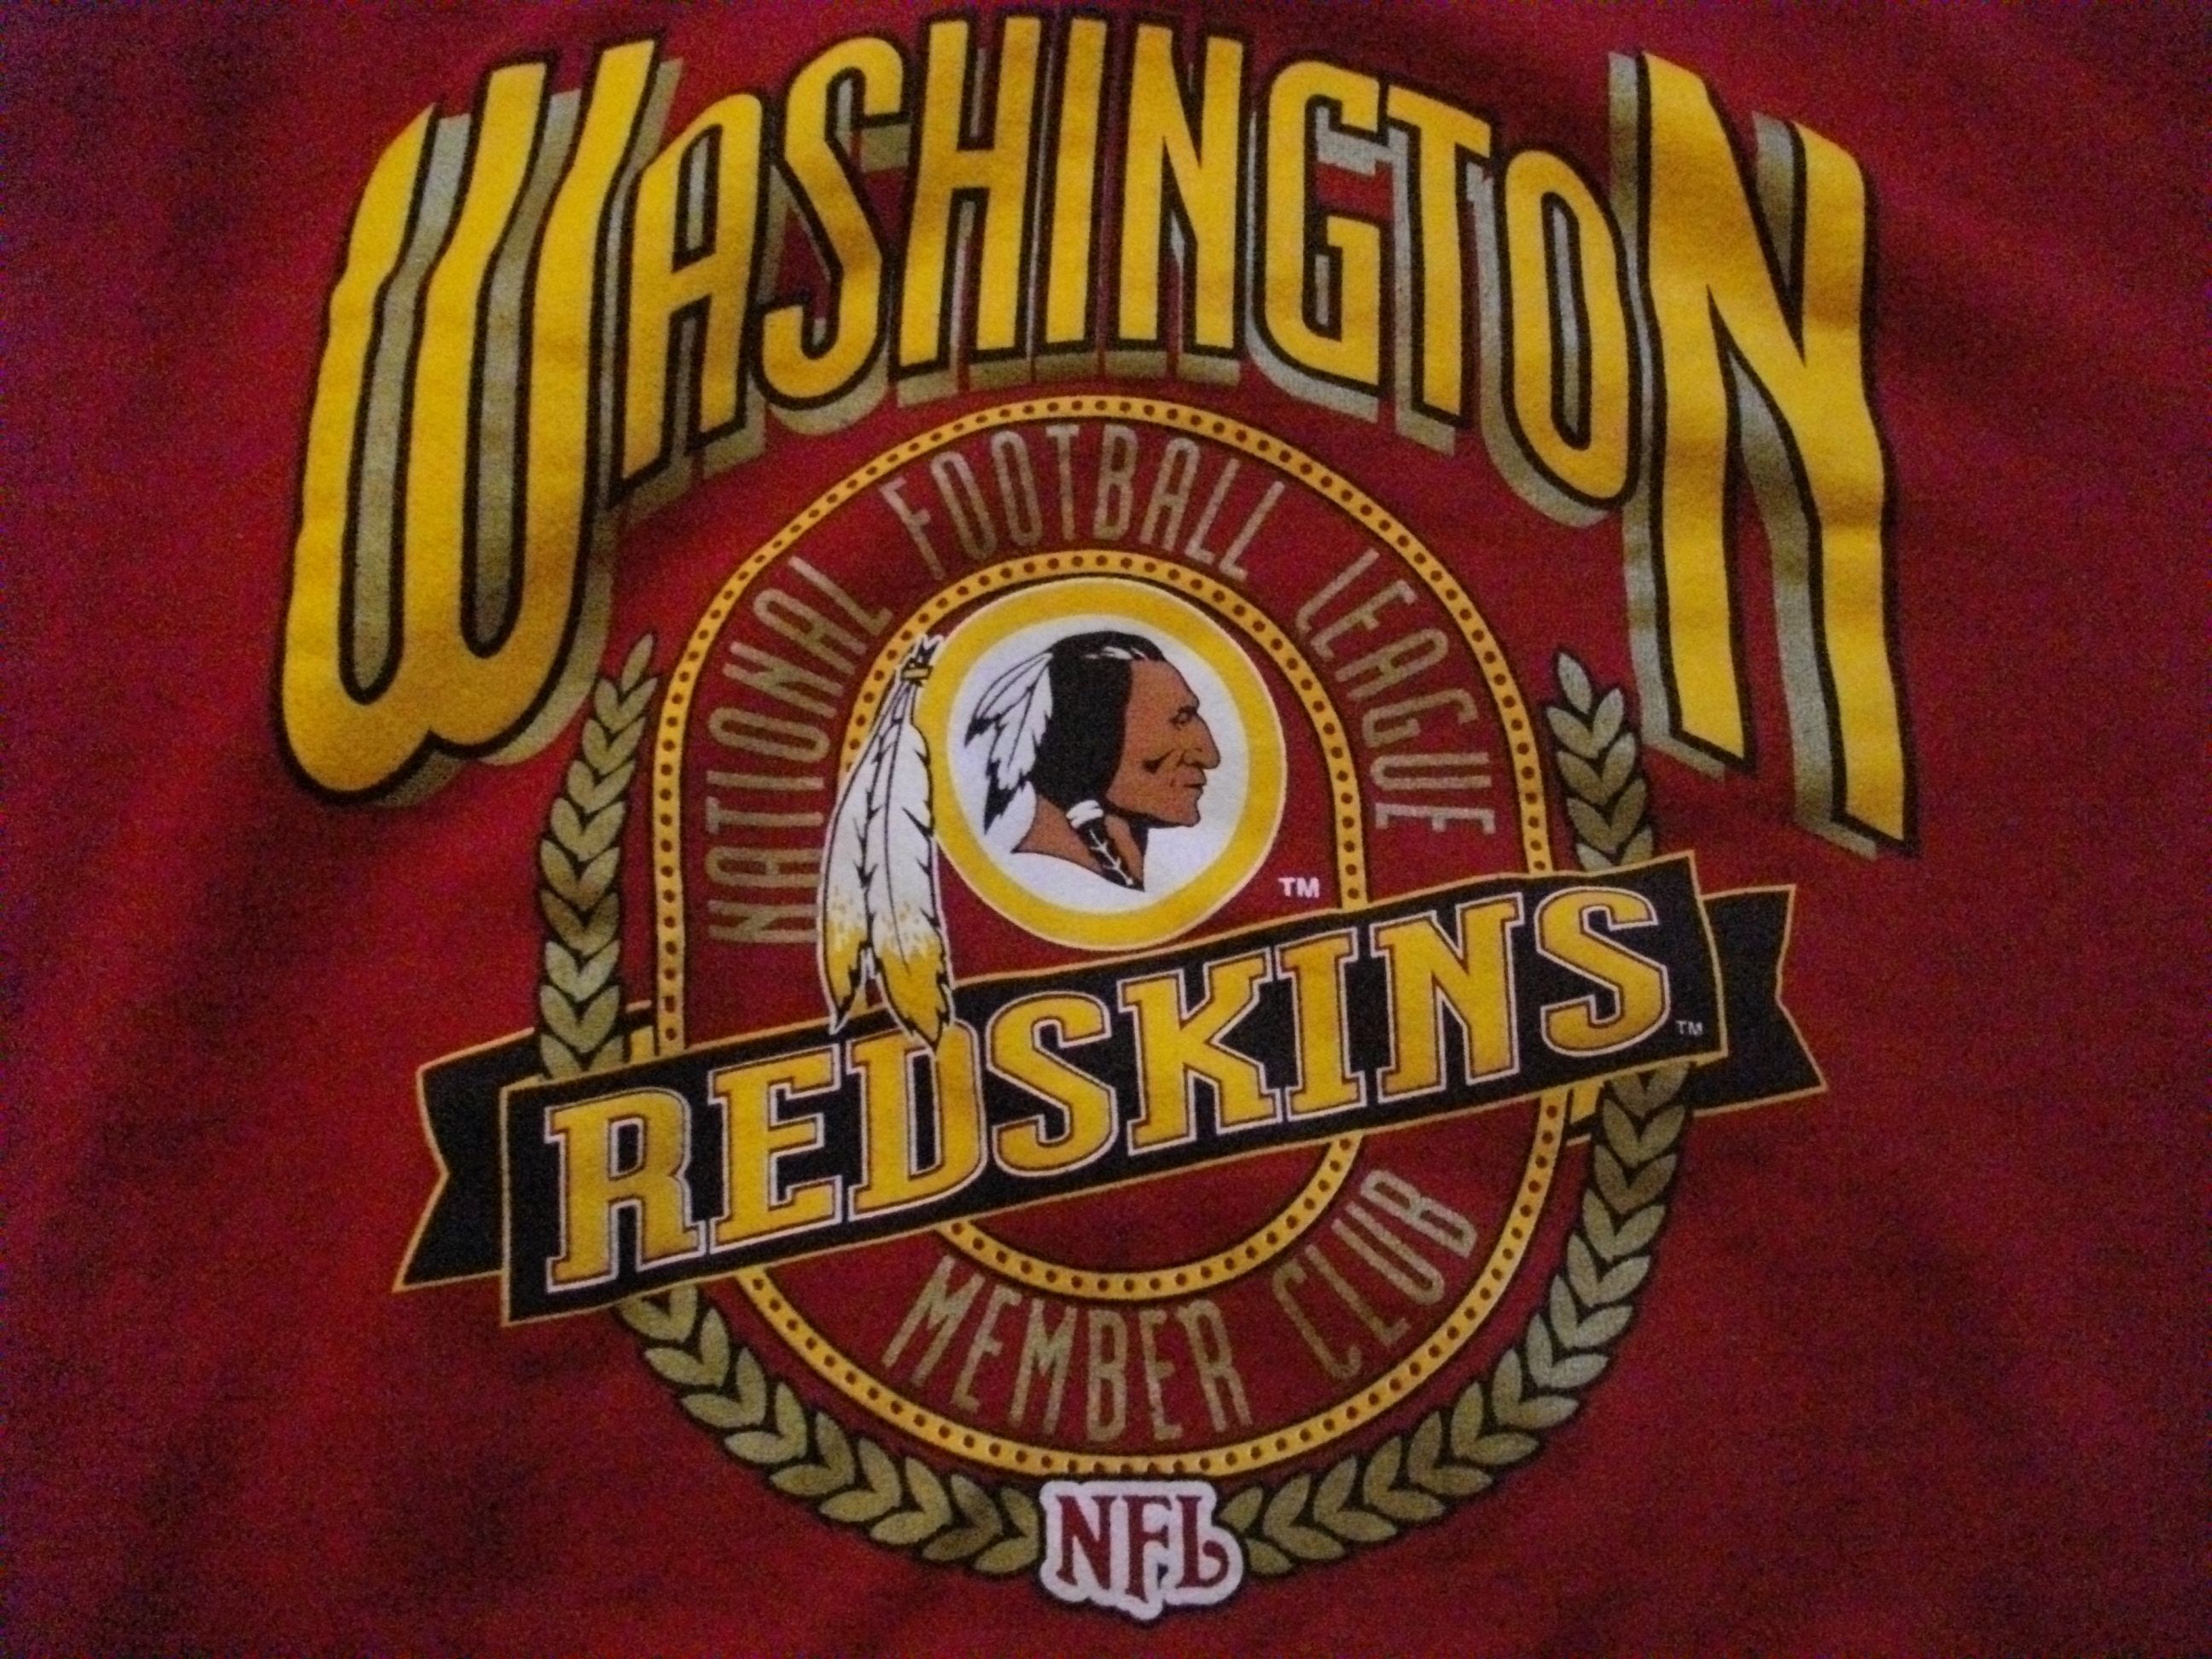 2592x1944 Redskins wallpaper for ipad